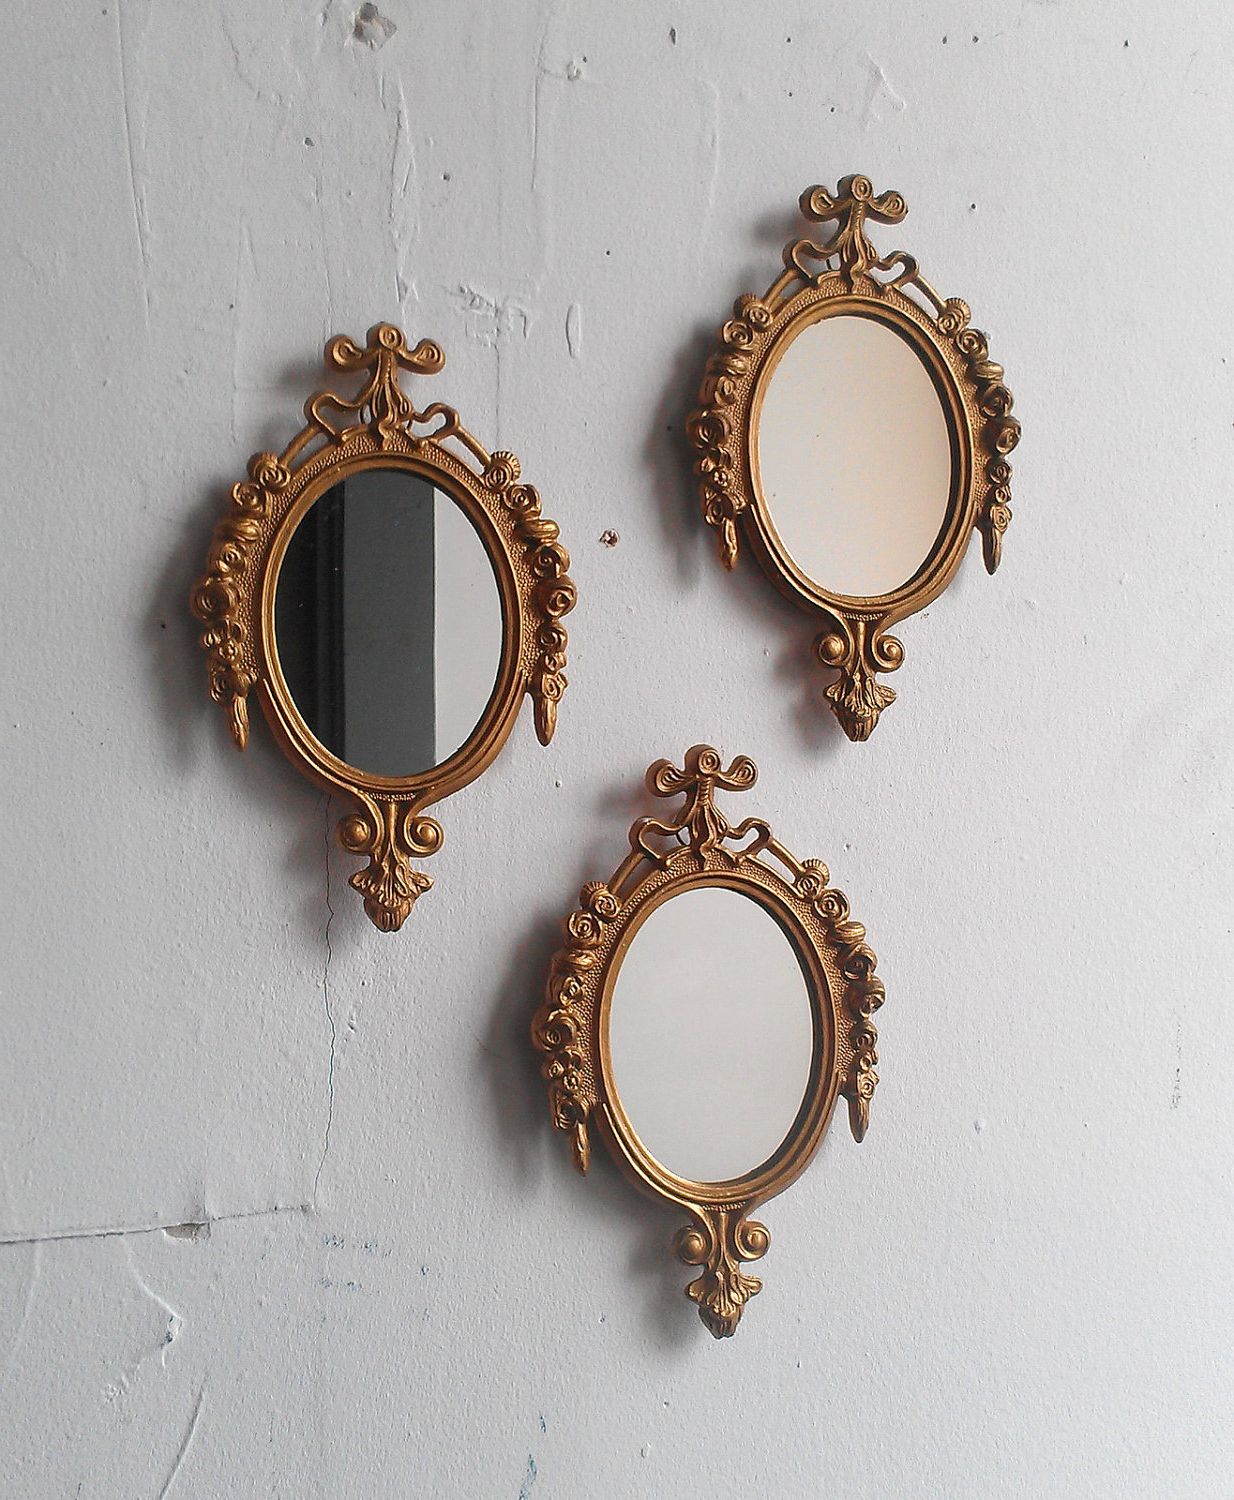 Mini Wall Mirrors Inside Widely Used Mesmerizing Small Decorative Wall Mirrors Also Cool Mirror Set Round (View 3 of 20)